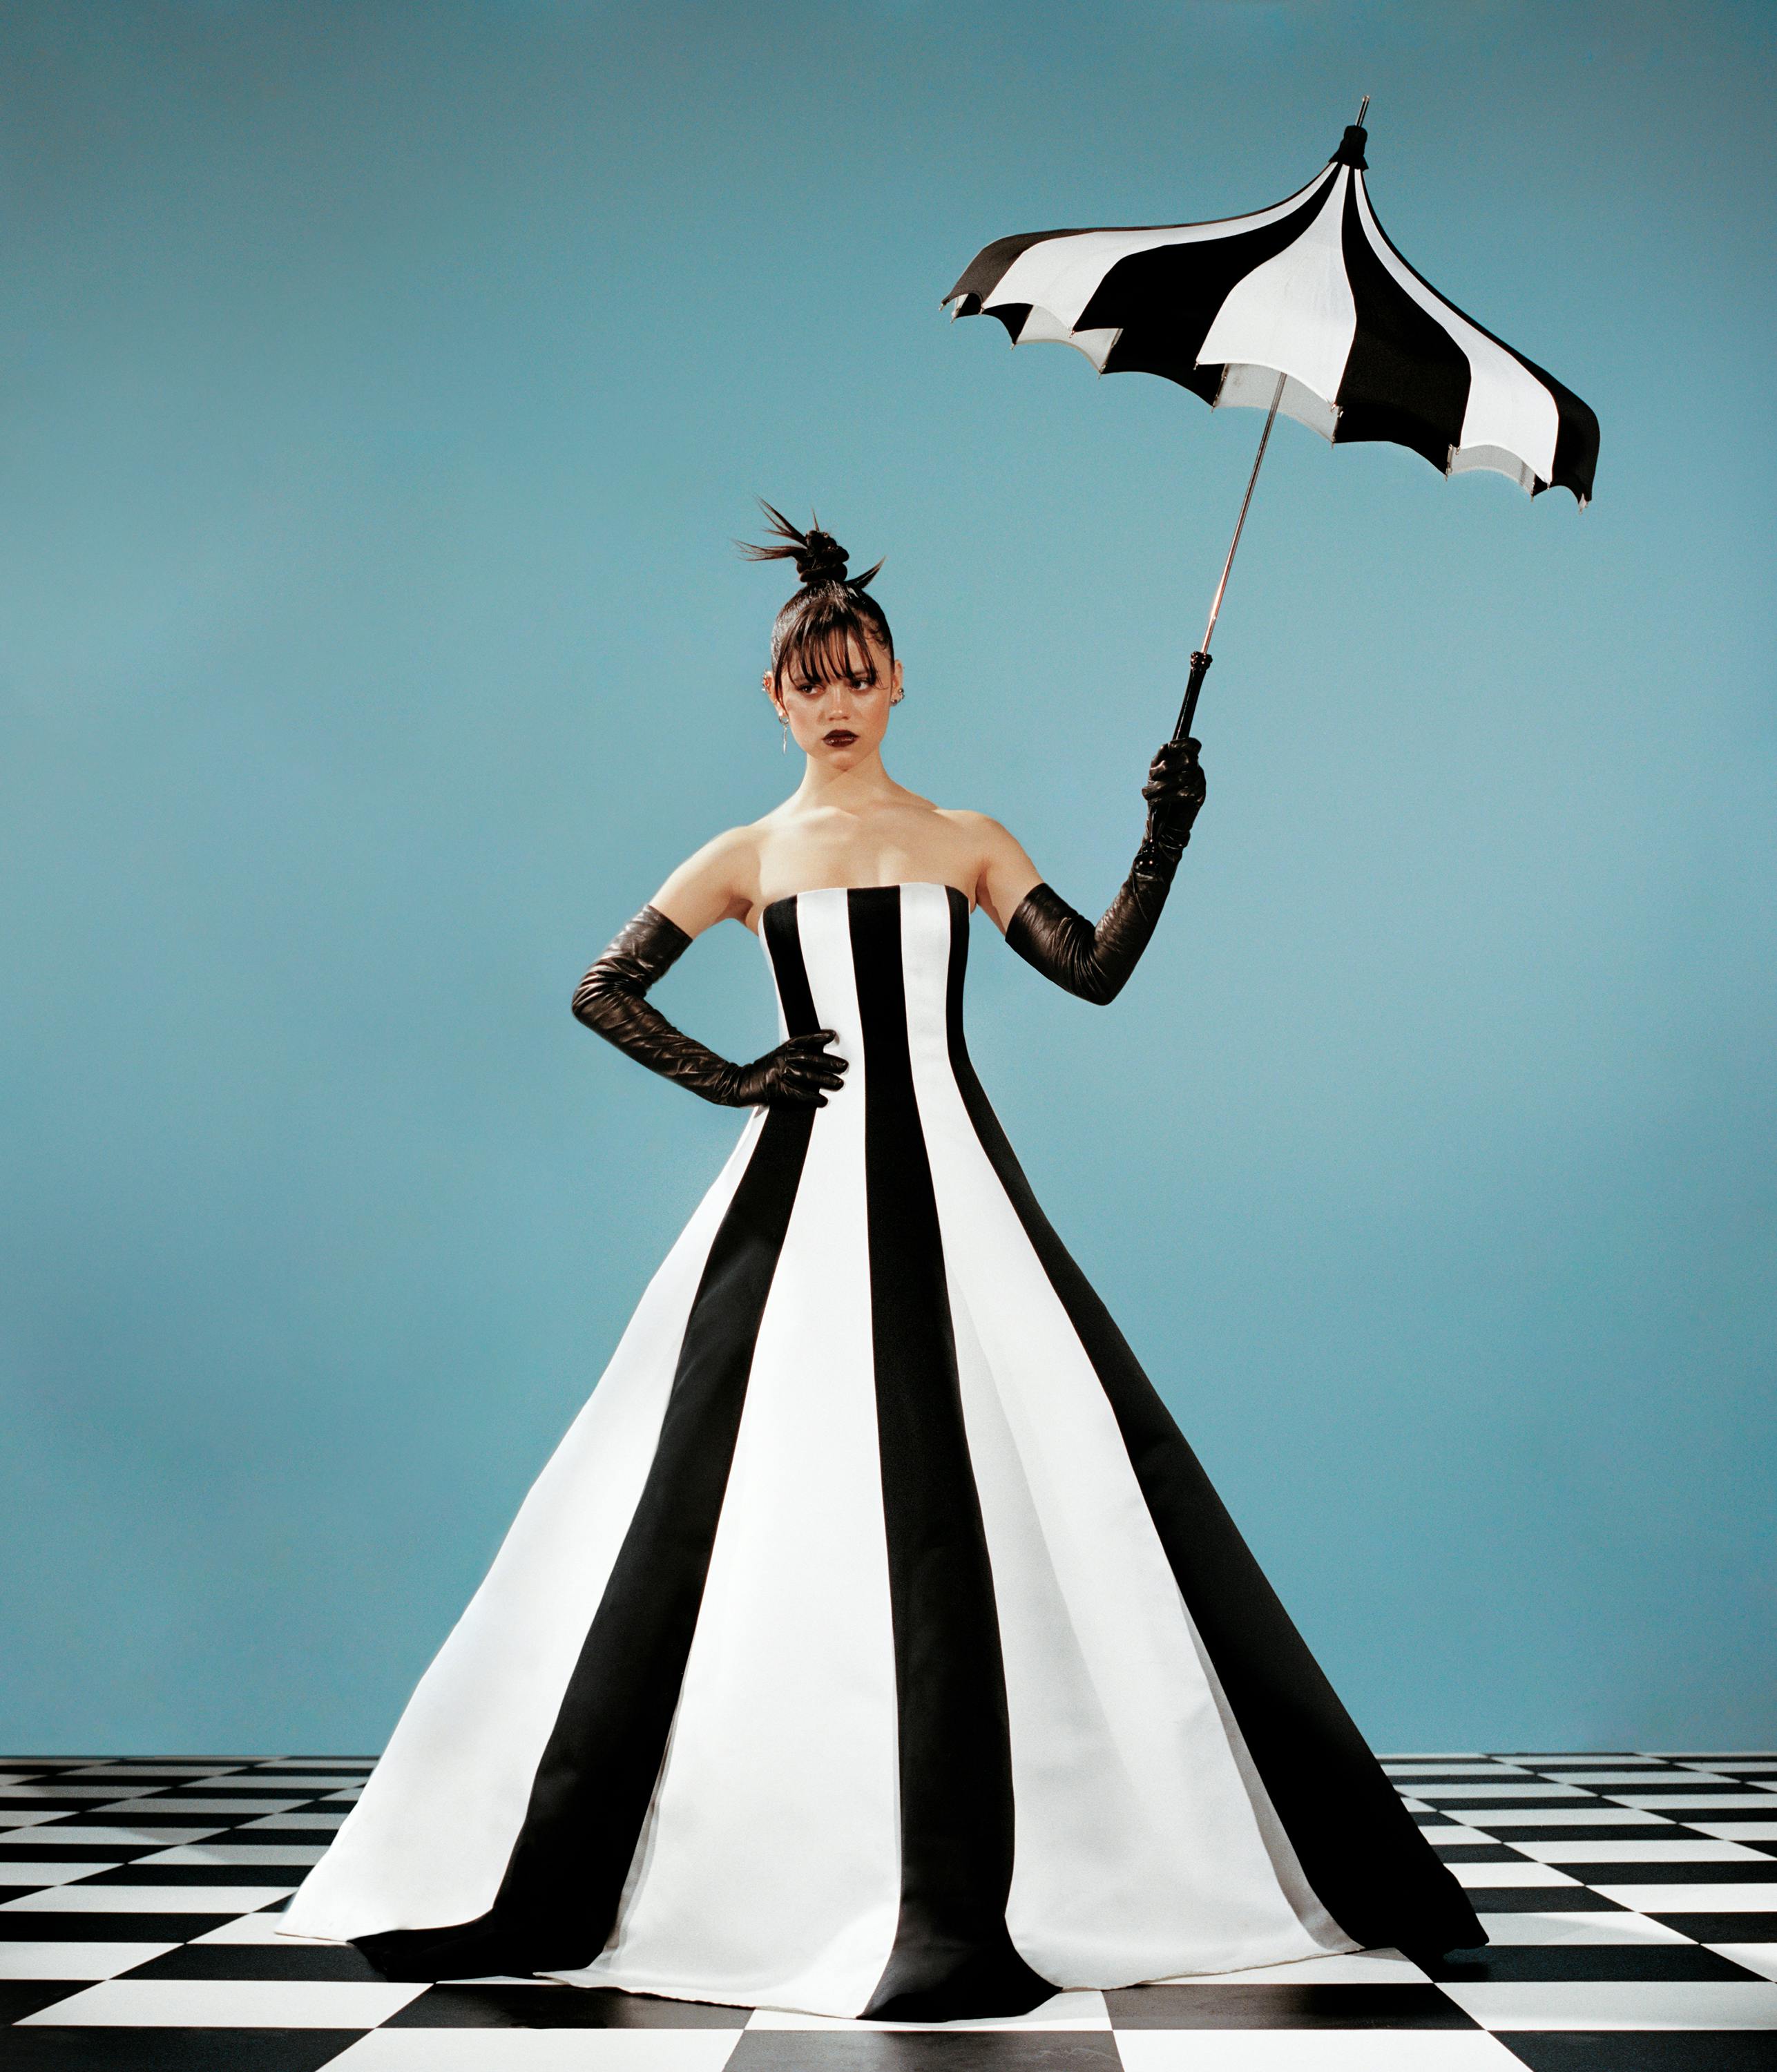 Jenna Ortega wears a black-and-white striped dress, black gloves, and carries a black-and-white umbrella. She stands on a black-and-white checkered floor against a teal background. 